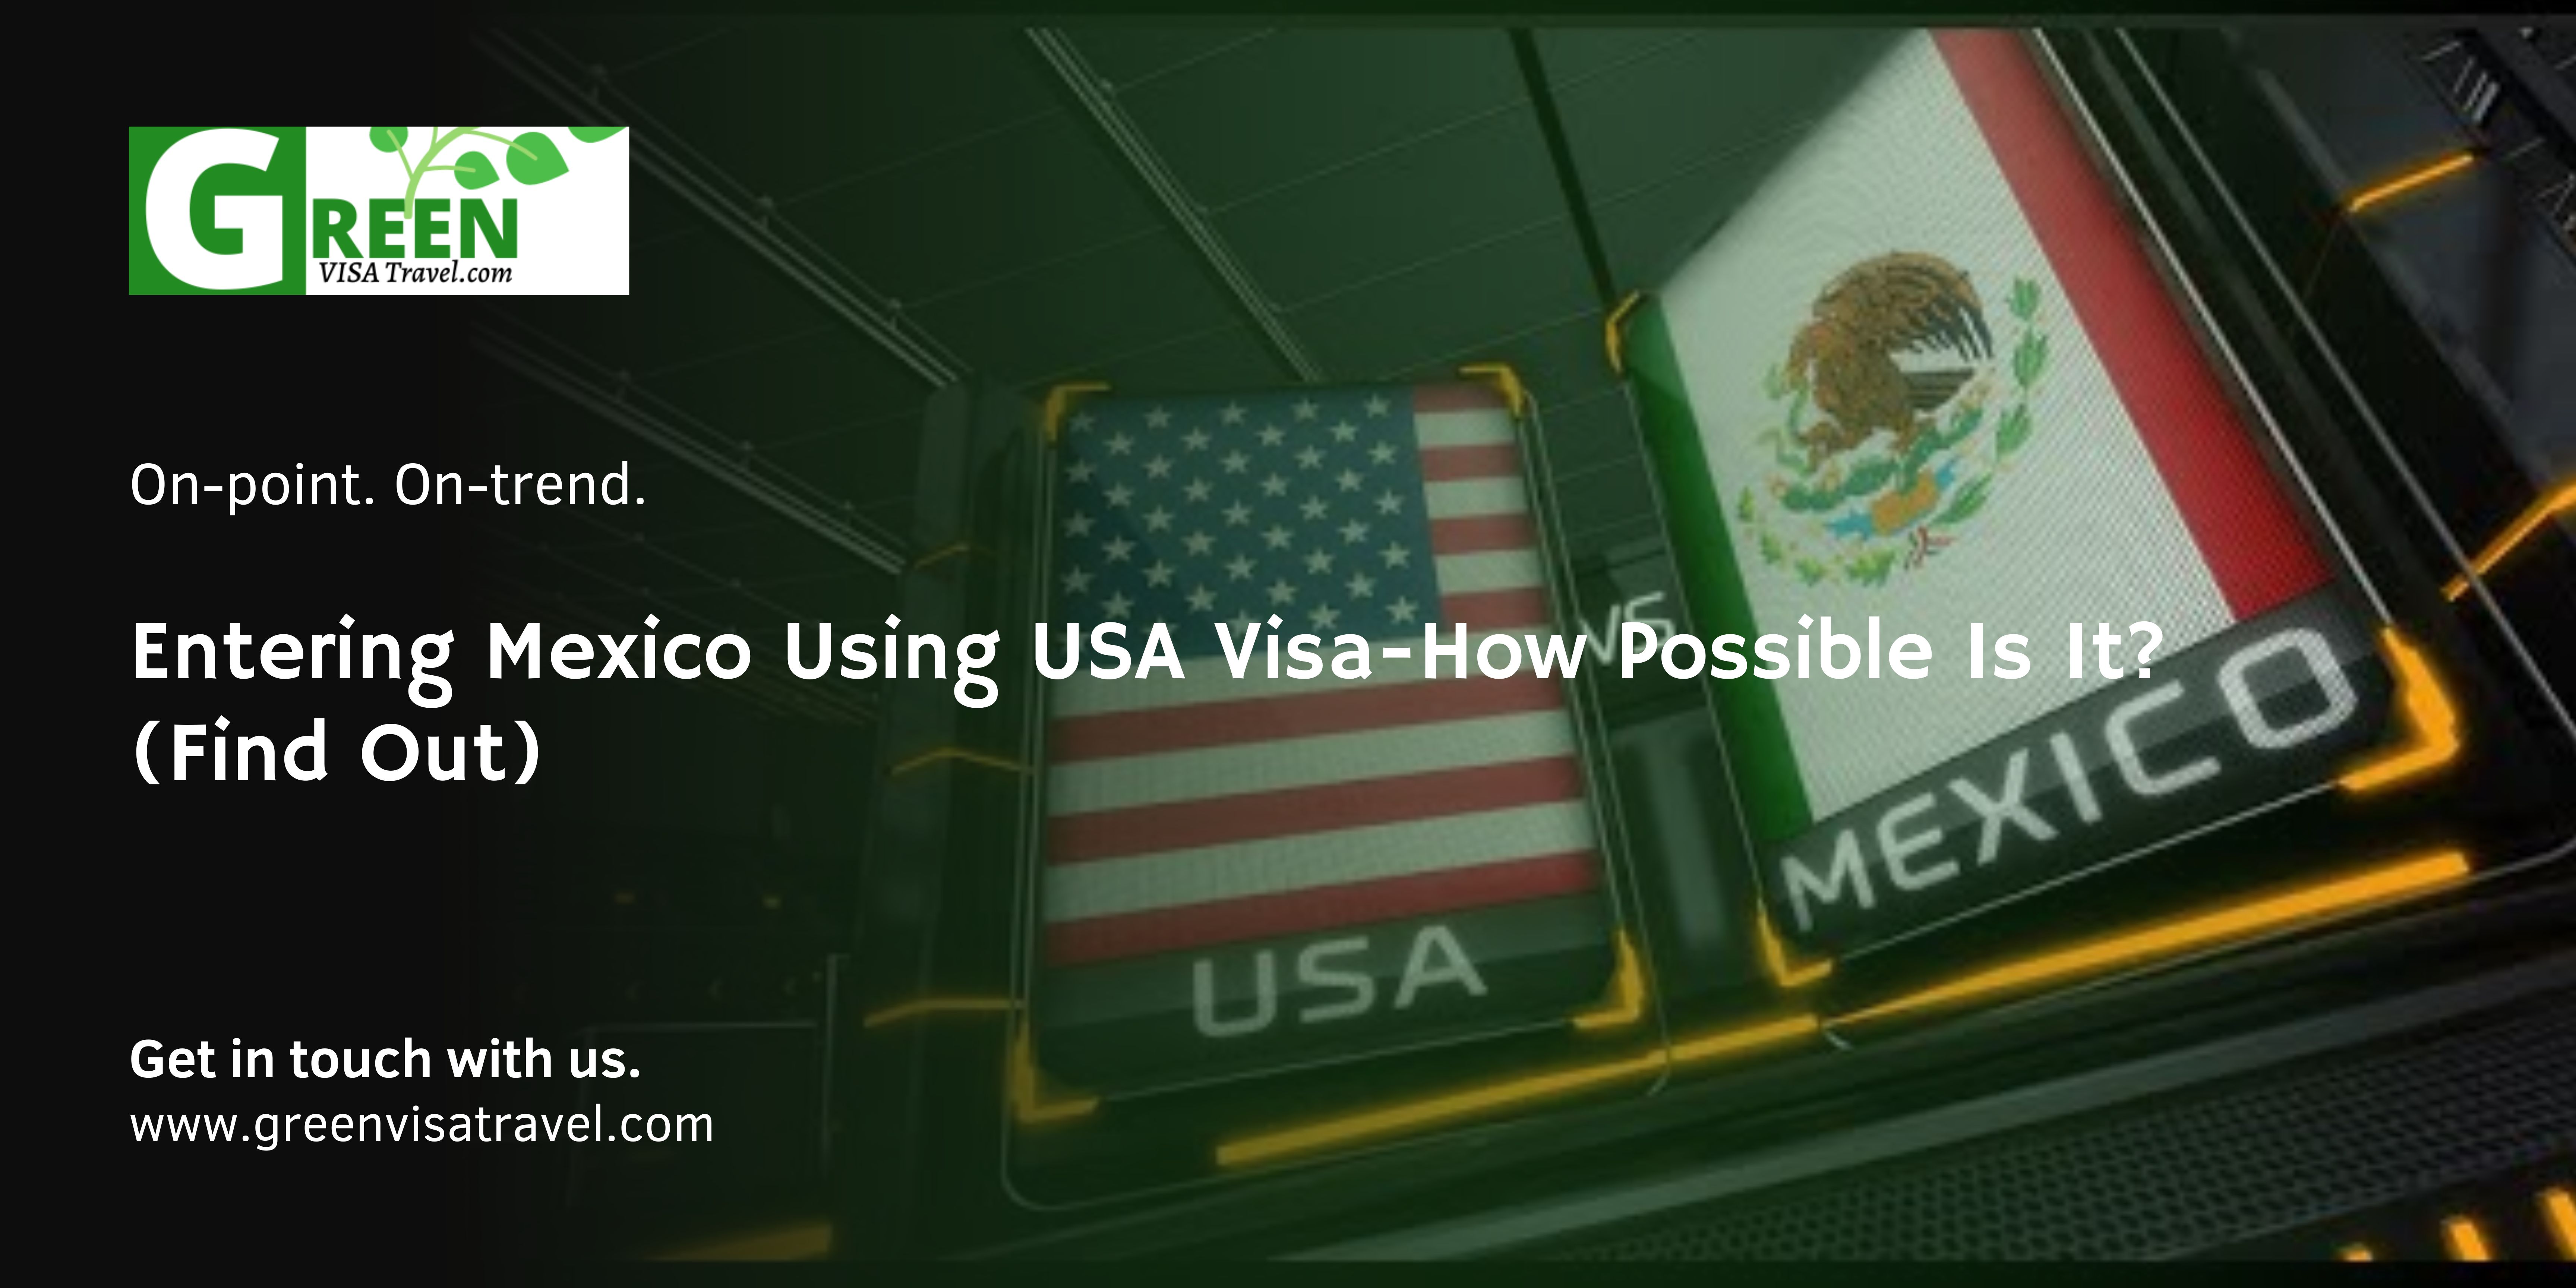 Entering Mexico Using USA Visa-How Possible Is It? (Find Out)